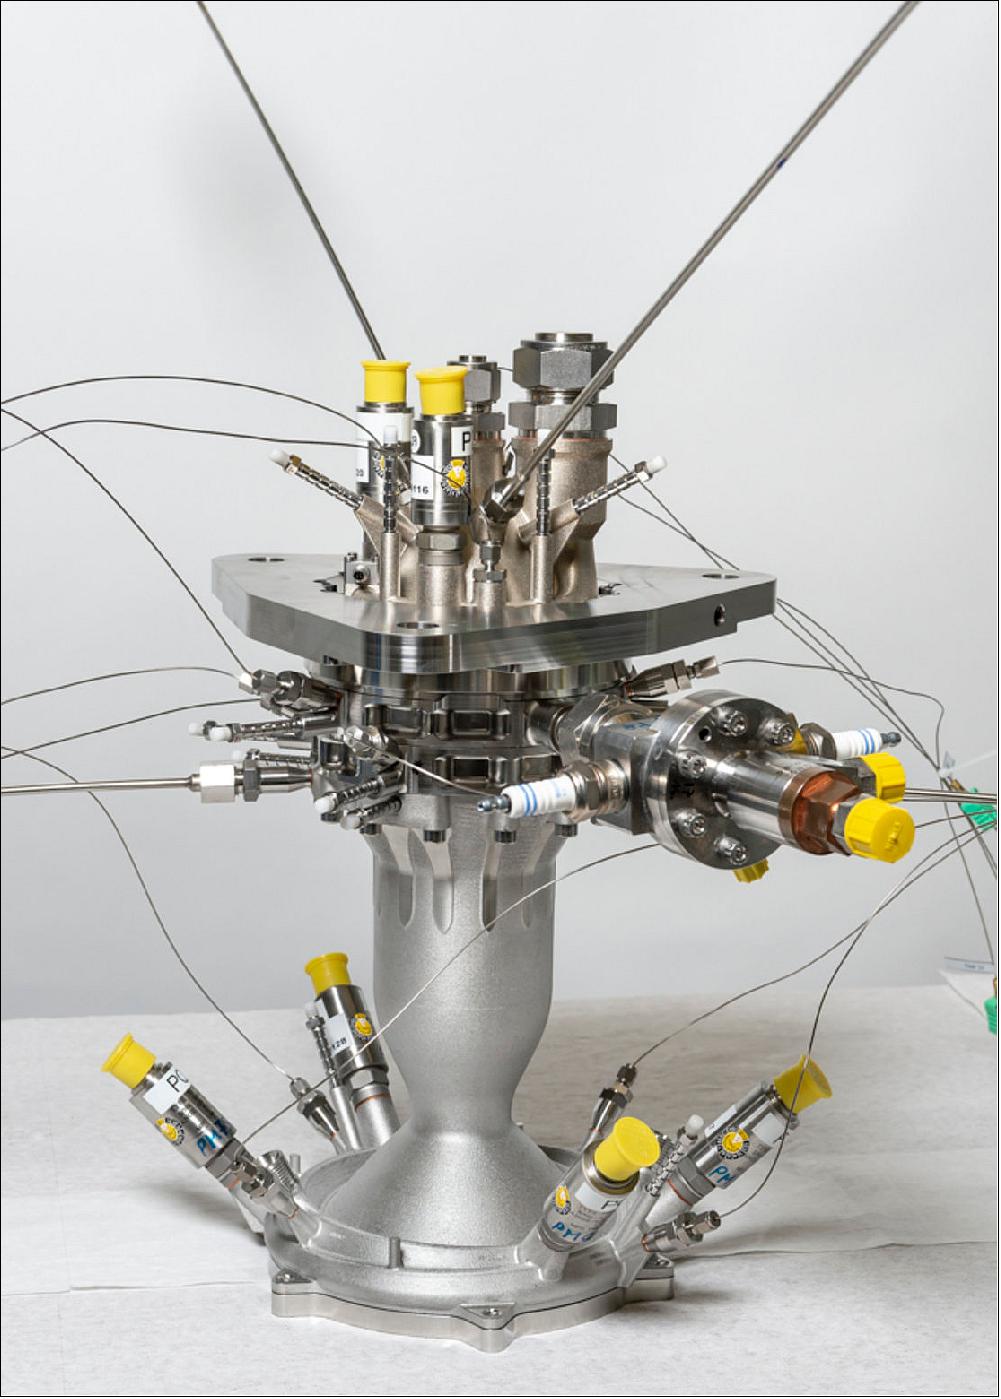 Figure 103: Developed by ArianeGroup within ESA’s Future Launchers Preparatory Program, this small-scale combustion chamber demonstrator helps to investigate flow and heat transfer phenomena on surfaces created by 3D printing – otherwise known as additive layer manufacturing. The photograph shows the combustion chamber and injector head, with the adapter rings for the DLR testing facility between them and a mounting plate. To the front, right is the igniter (image credit: ArianeGroup Holding, Jürgen Dannenberg)